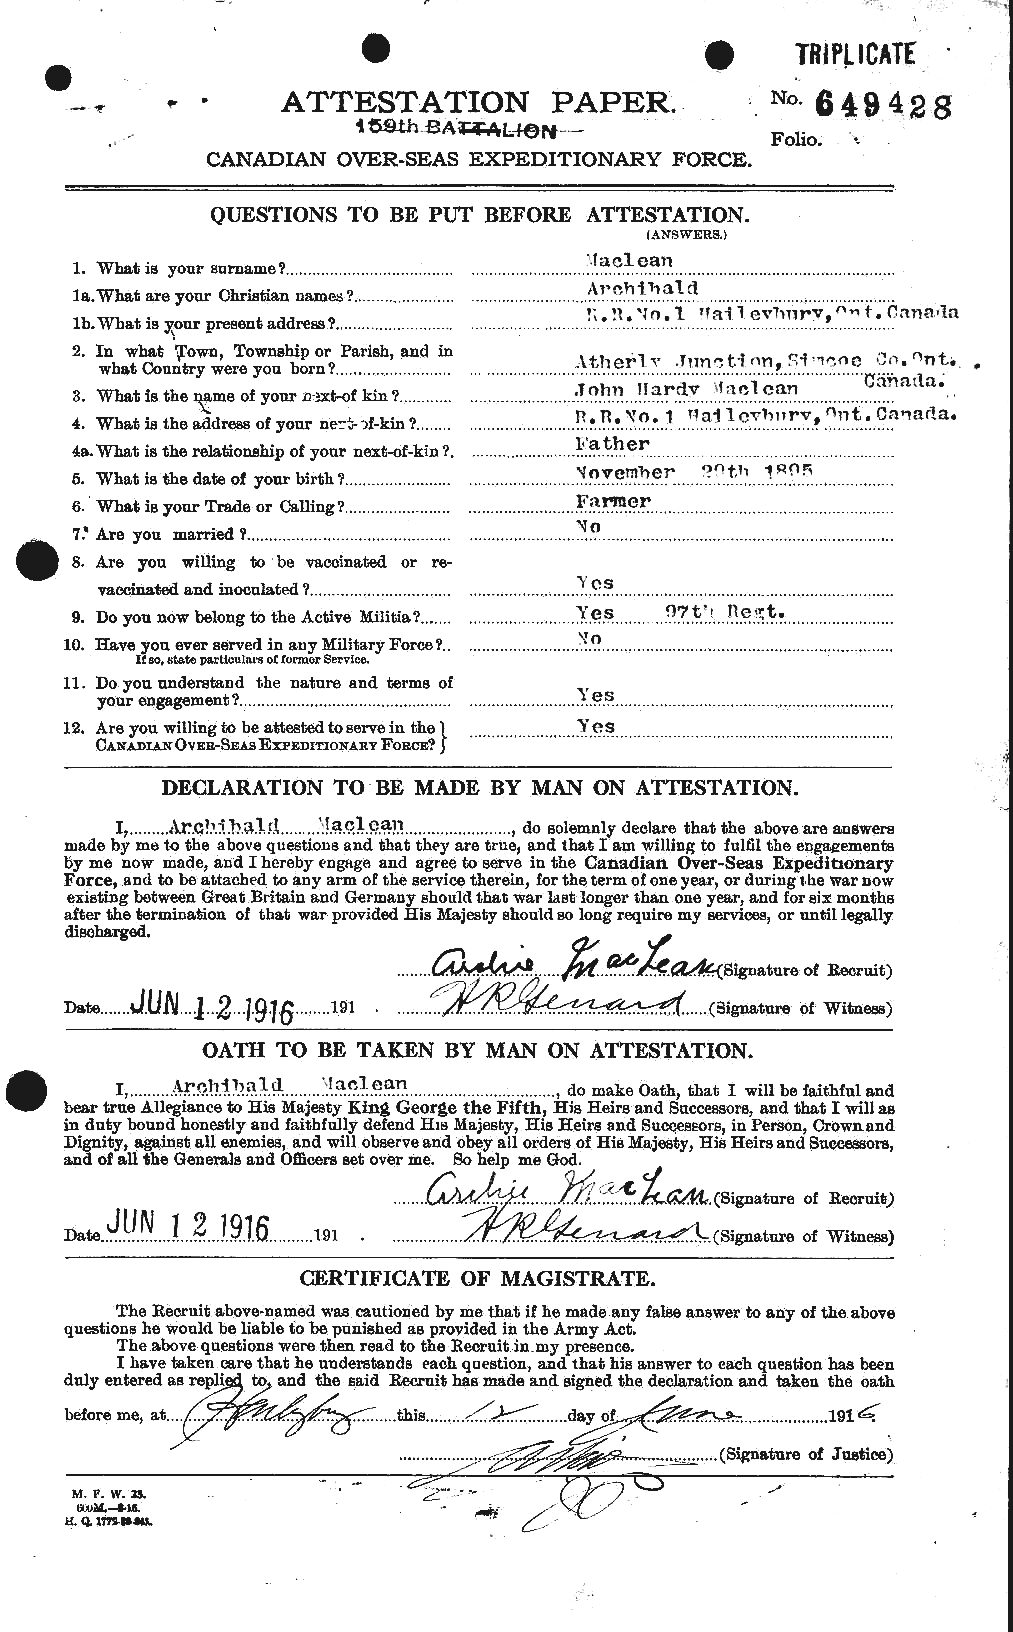 Personnel Records of the First World War - CEF 532837a